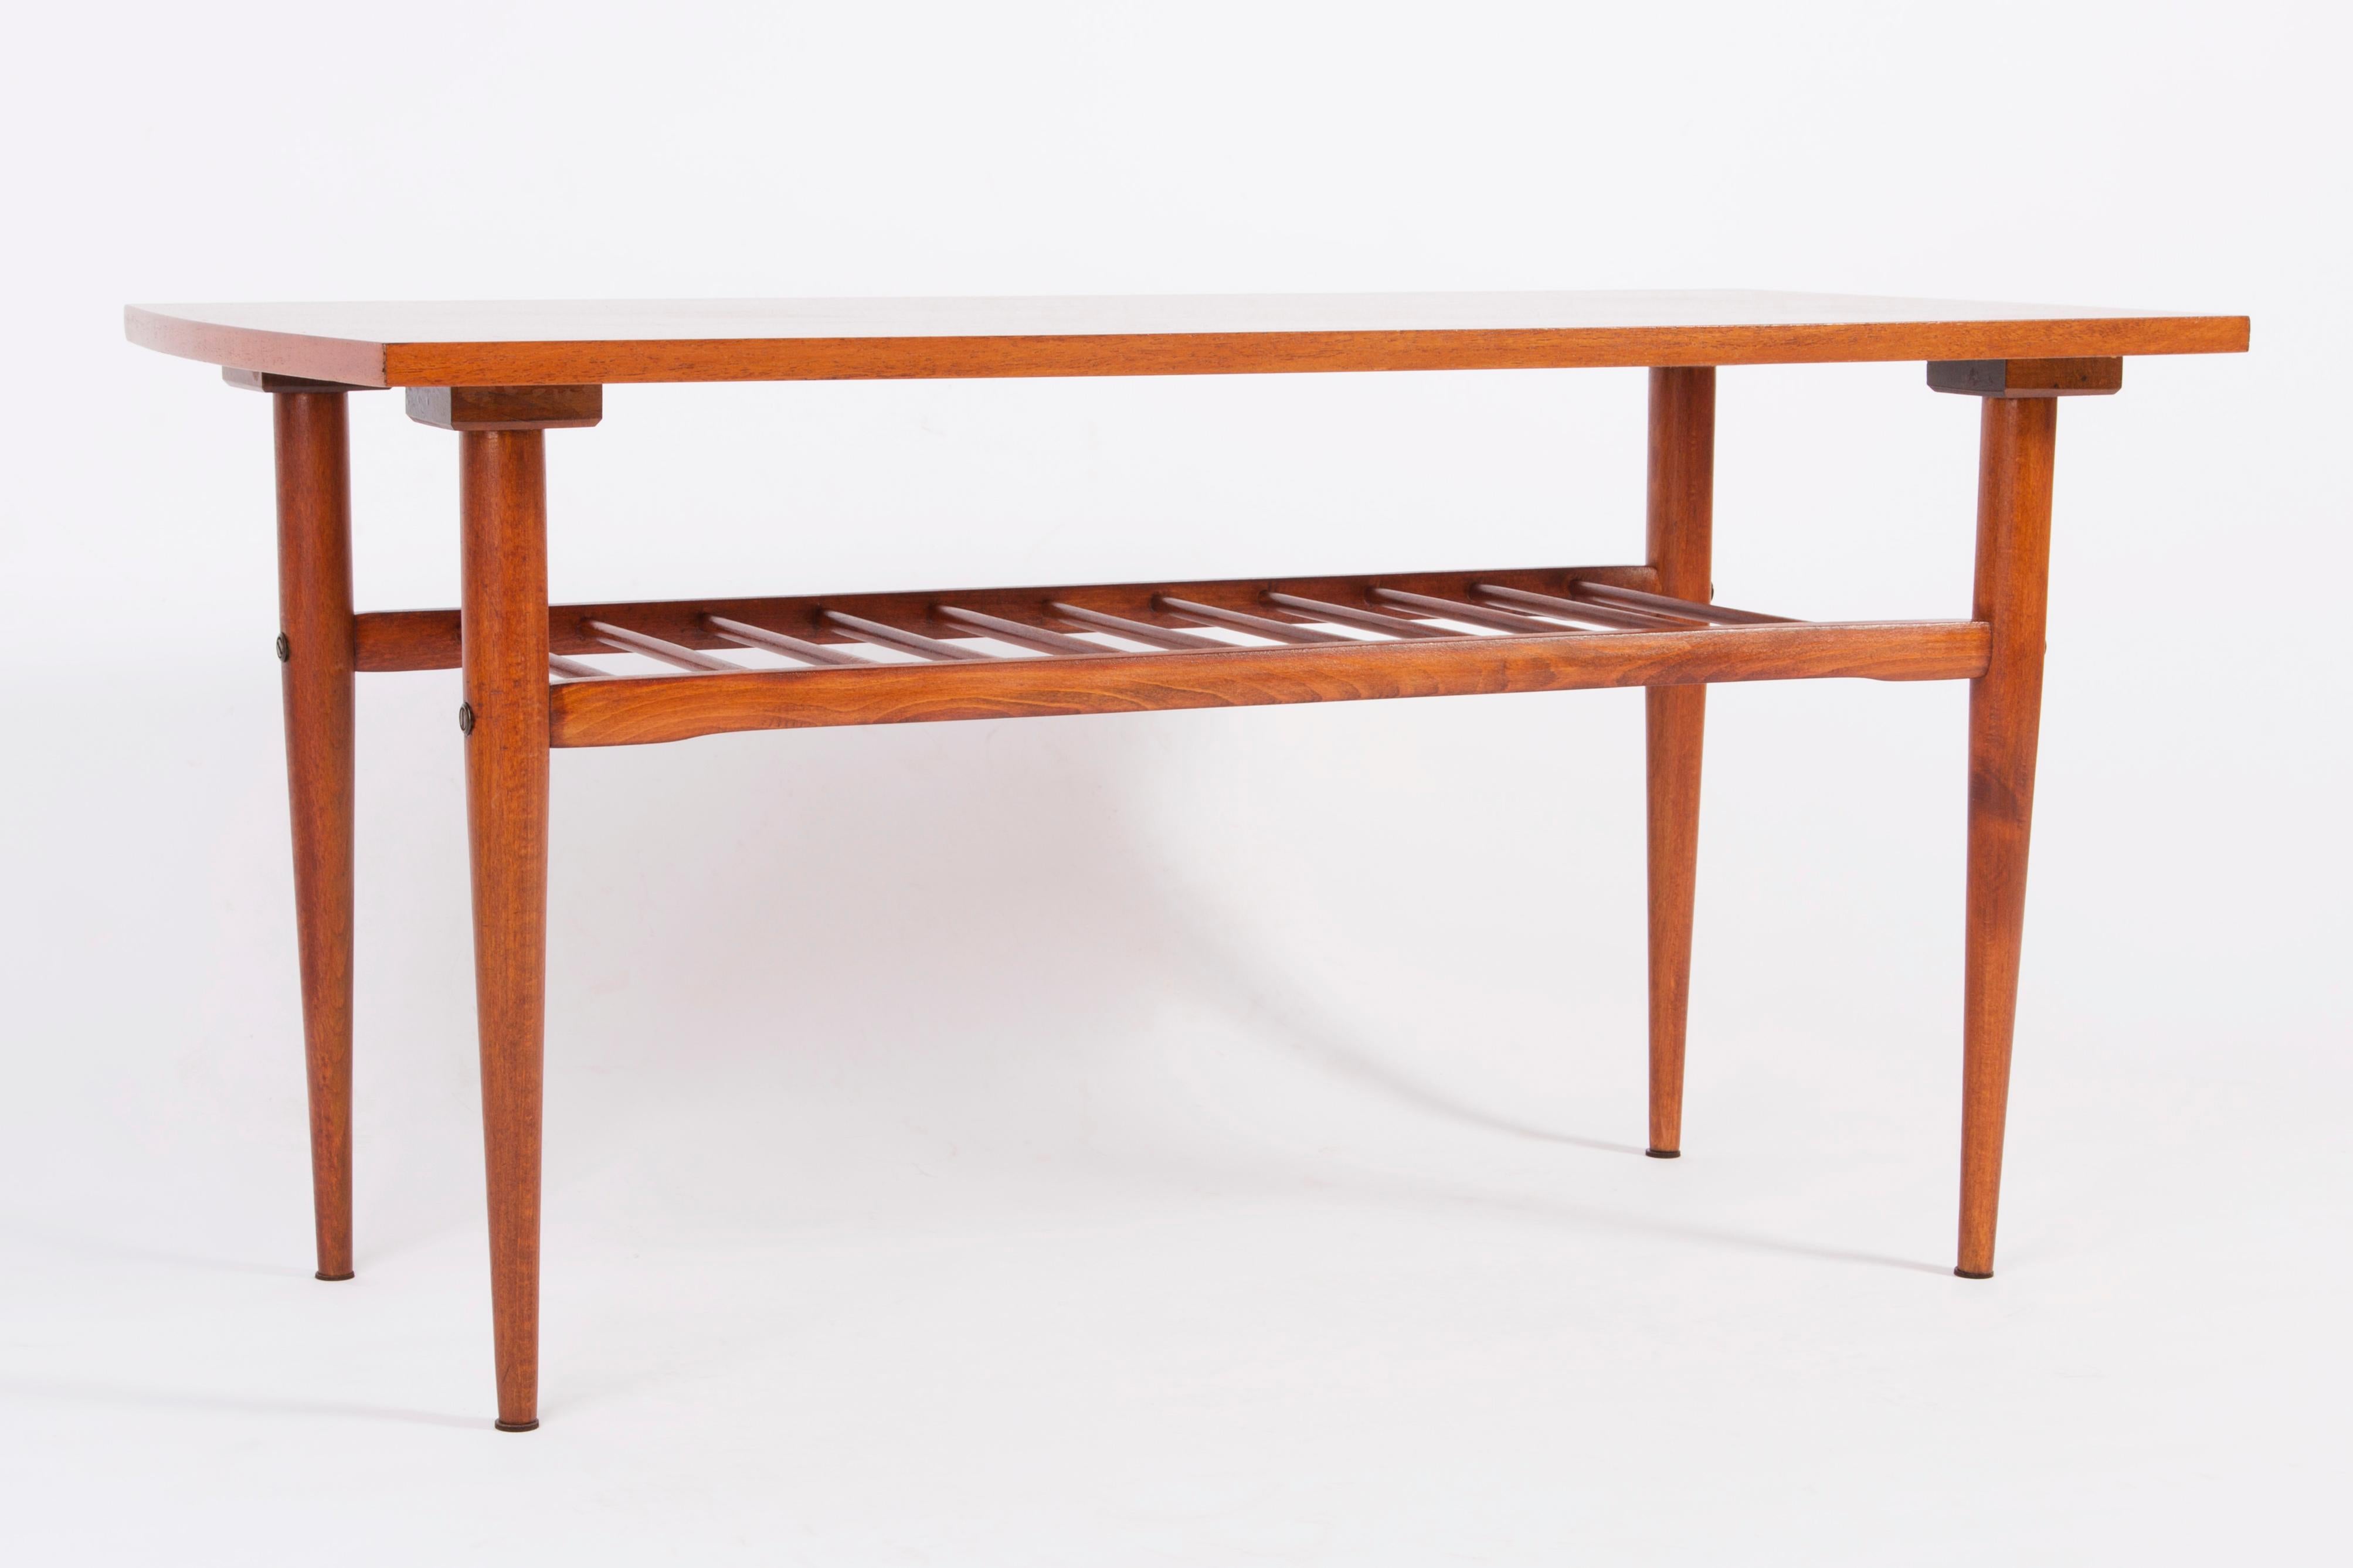 Coffee table from the 1960s. It was manufactured in Poland in 1960s. The table was made of wood and veneer plywood, it was also full renovated. Excellent condition.